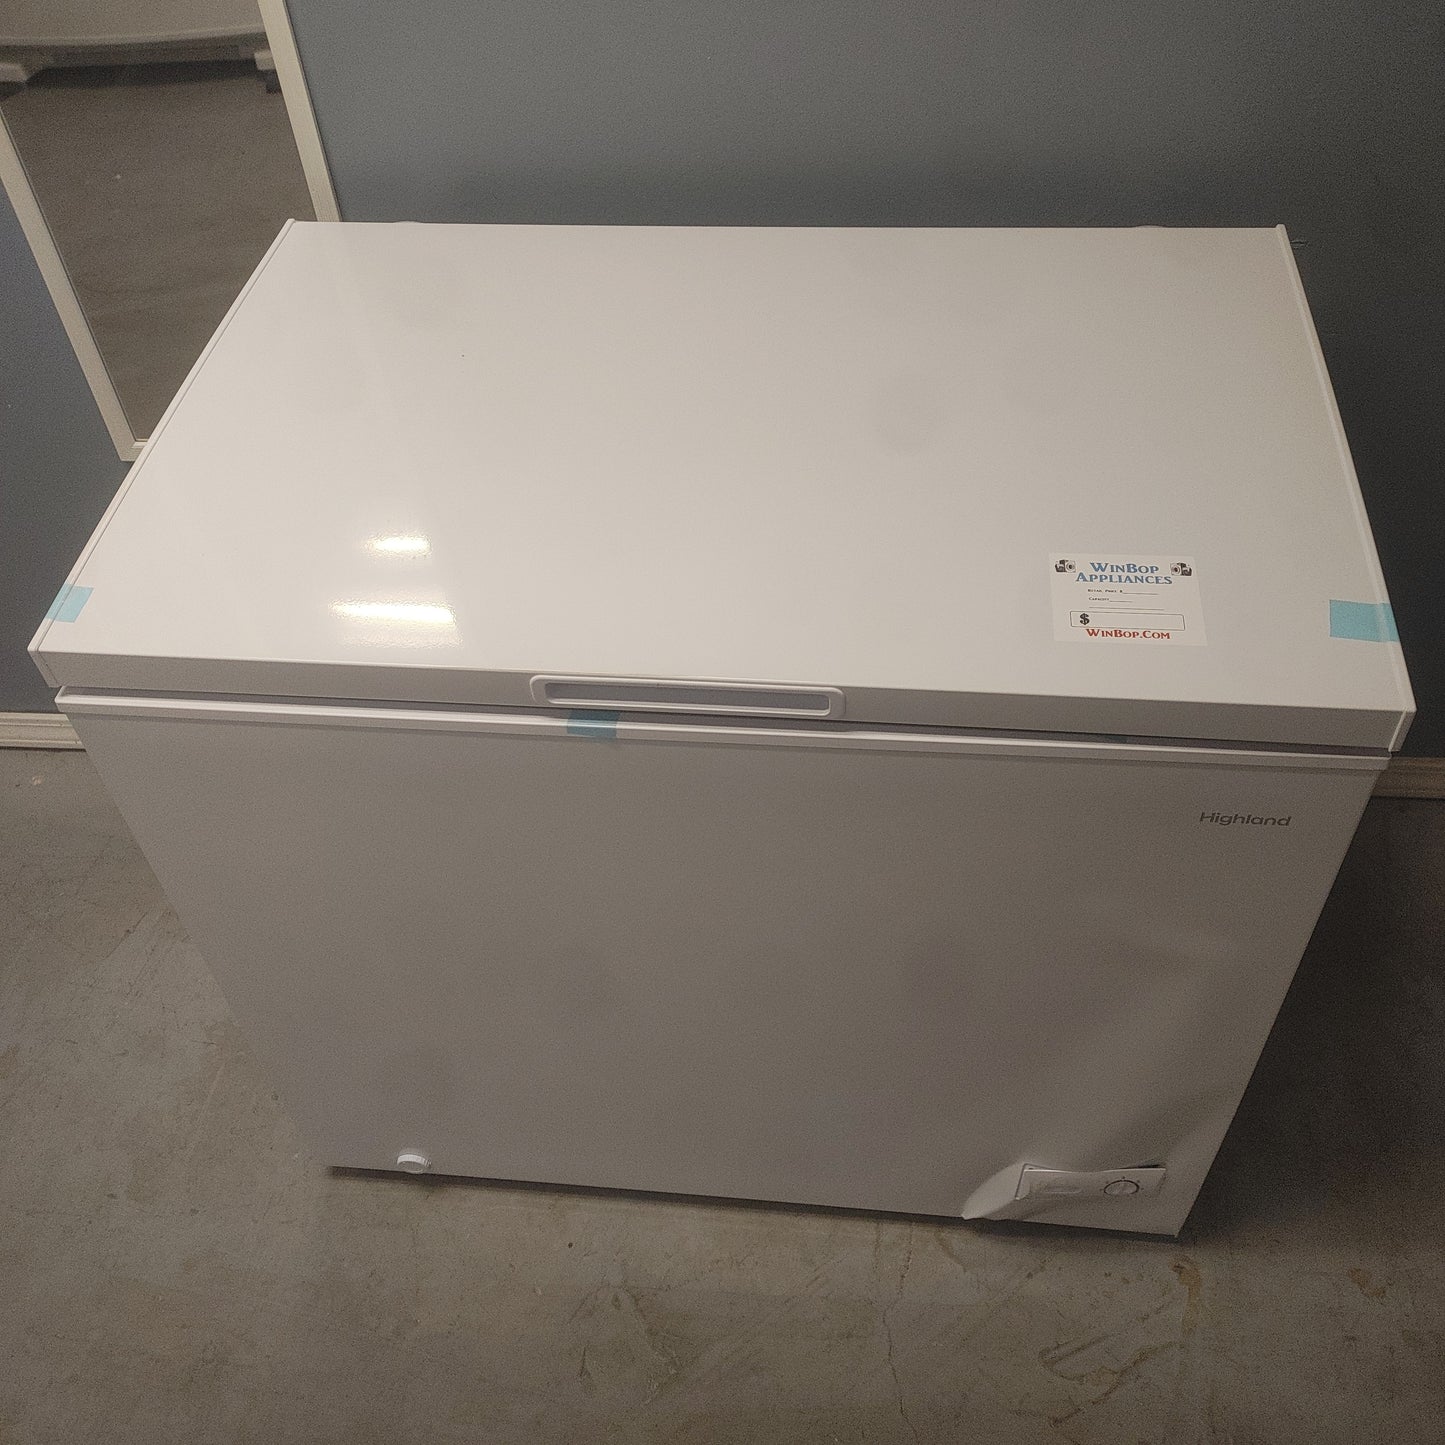 New Highland 7.2 Cubic ft Chest Freezer. Dent and Ding special